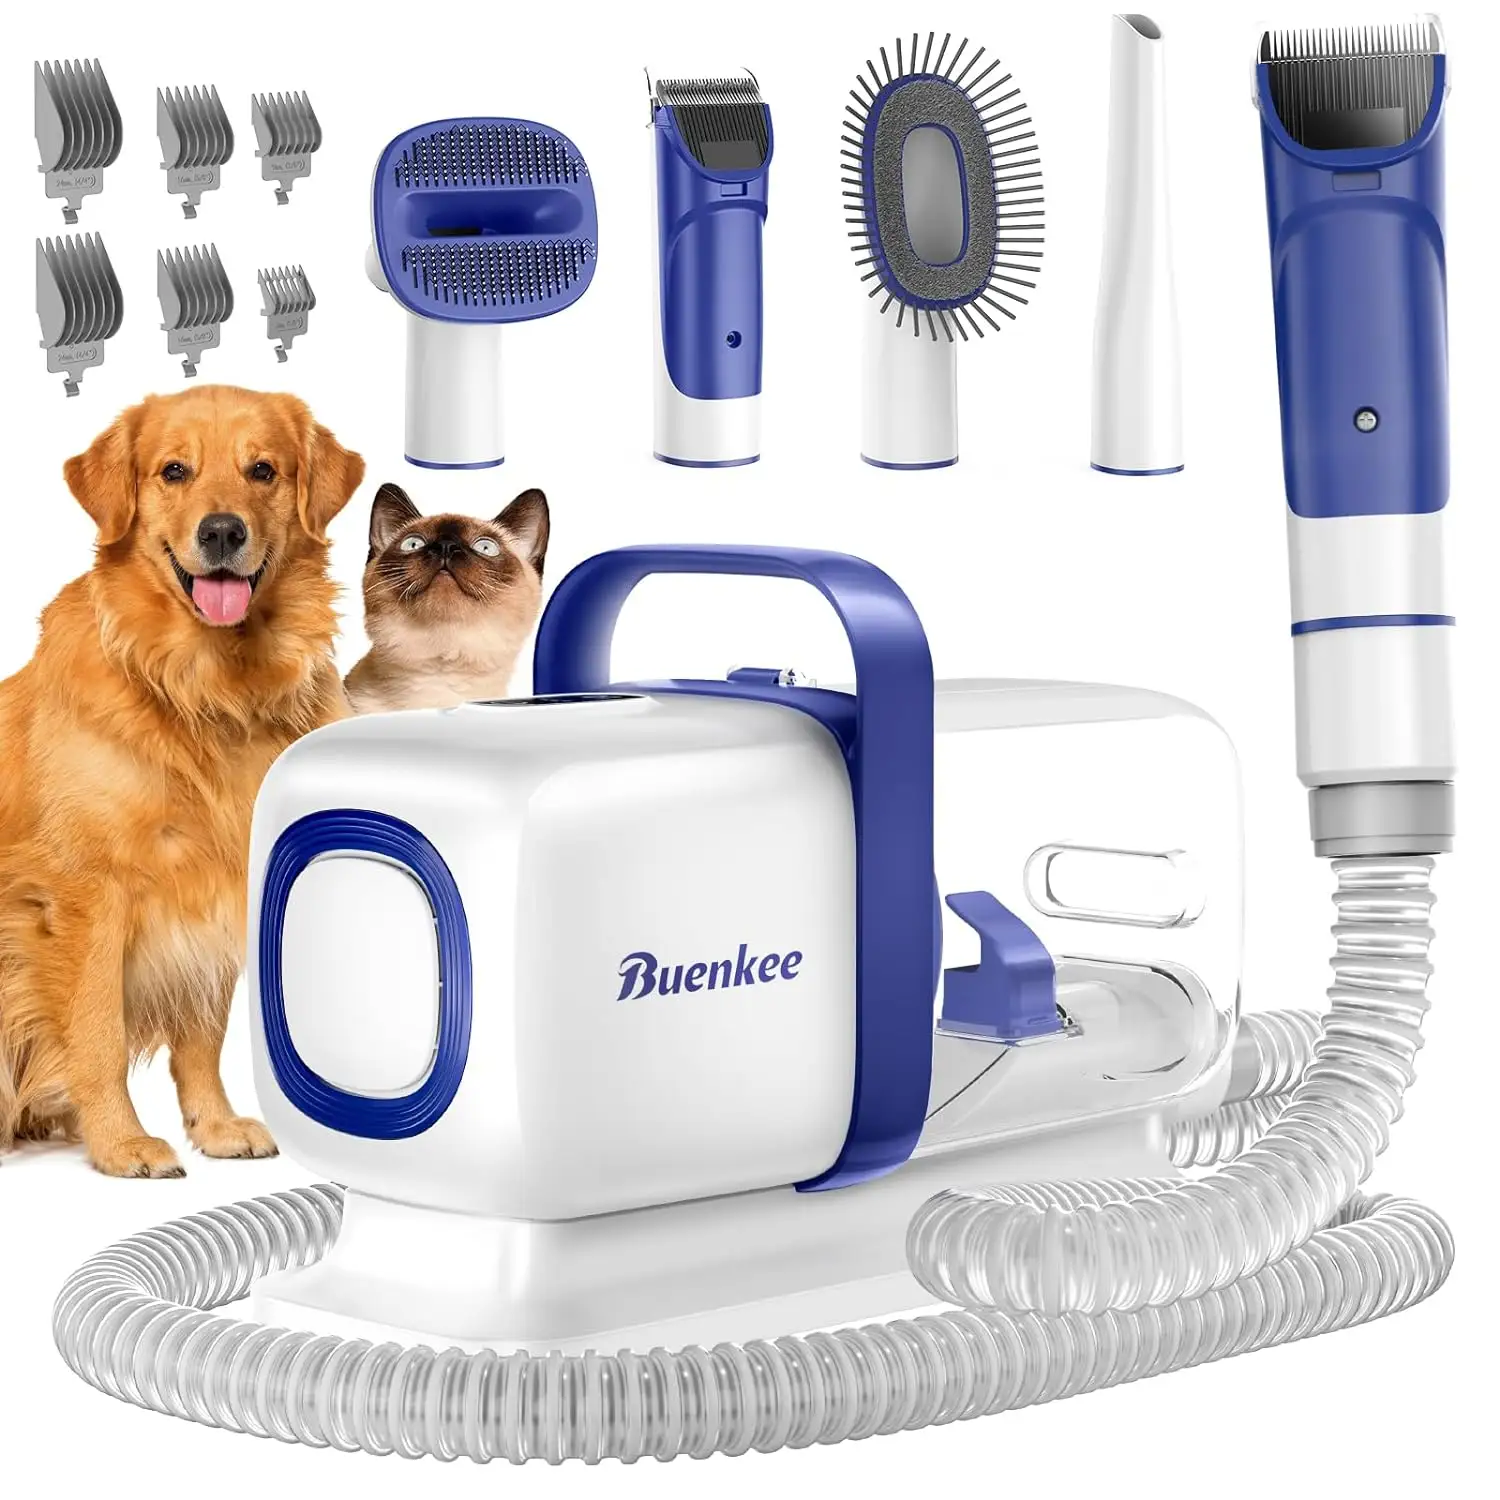 Pet Supplies Electric Trimmers Dog Grooming Kits and Cat Cleaners Vacuum Cleaners Grooming